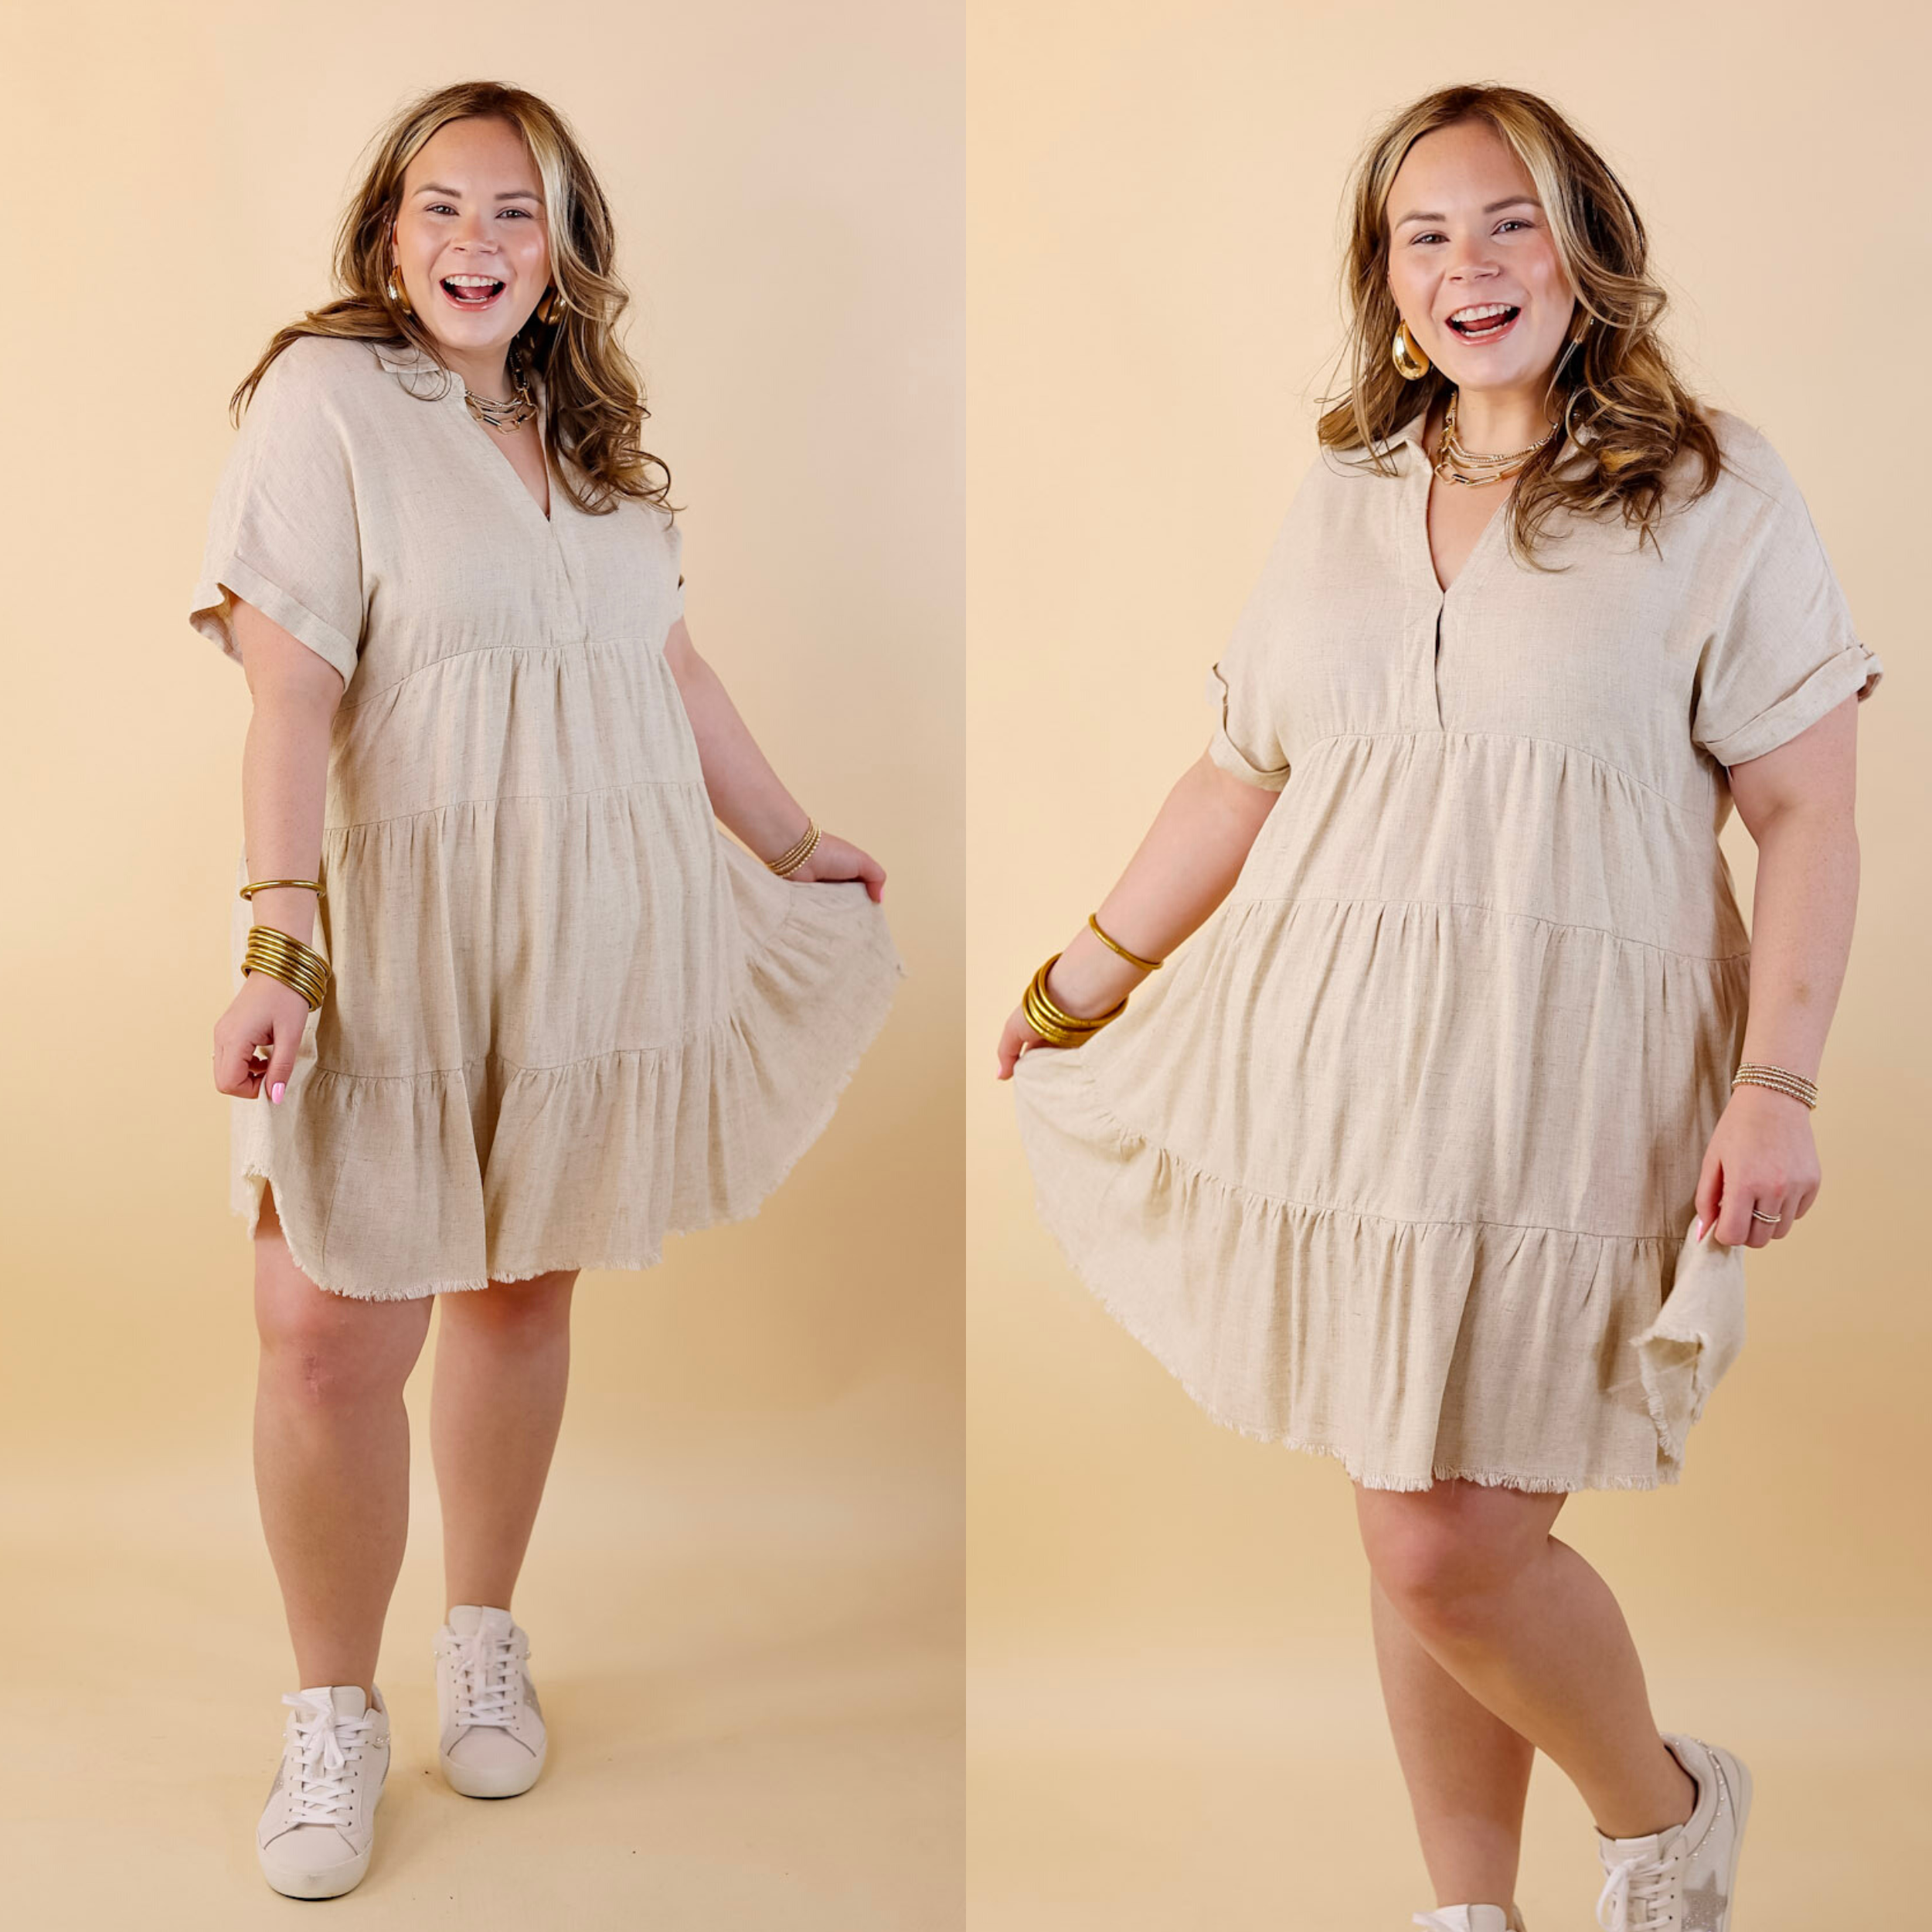 Taos Transitions Ruffle Tiered Collared Dress with Frayed Hem in Beige - Giddy Up Glamour Boutique